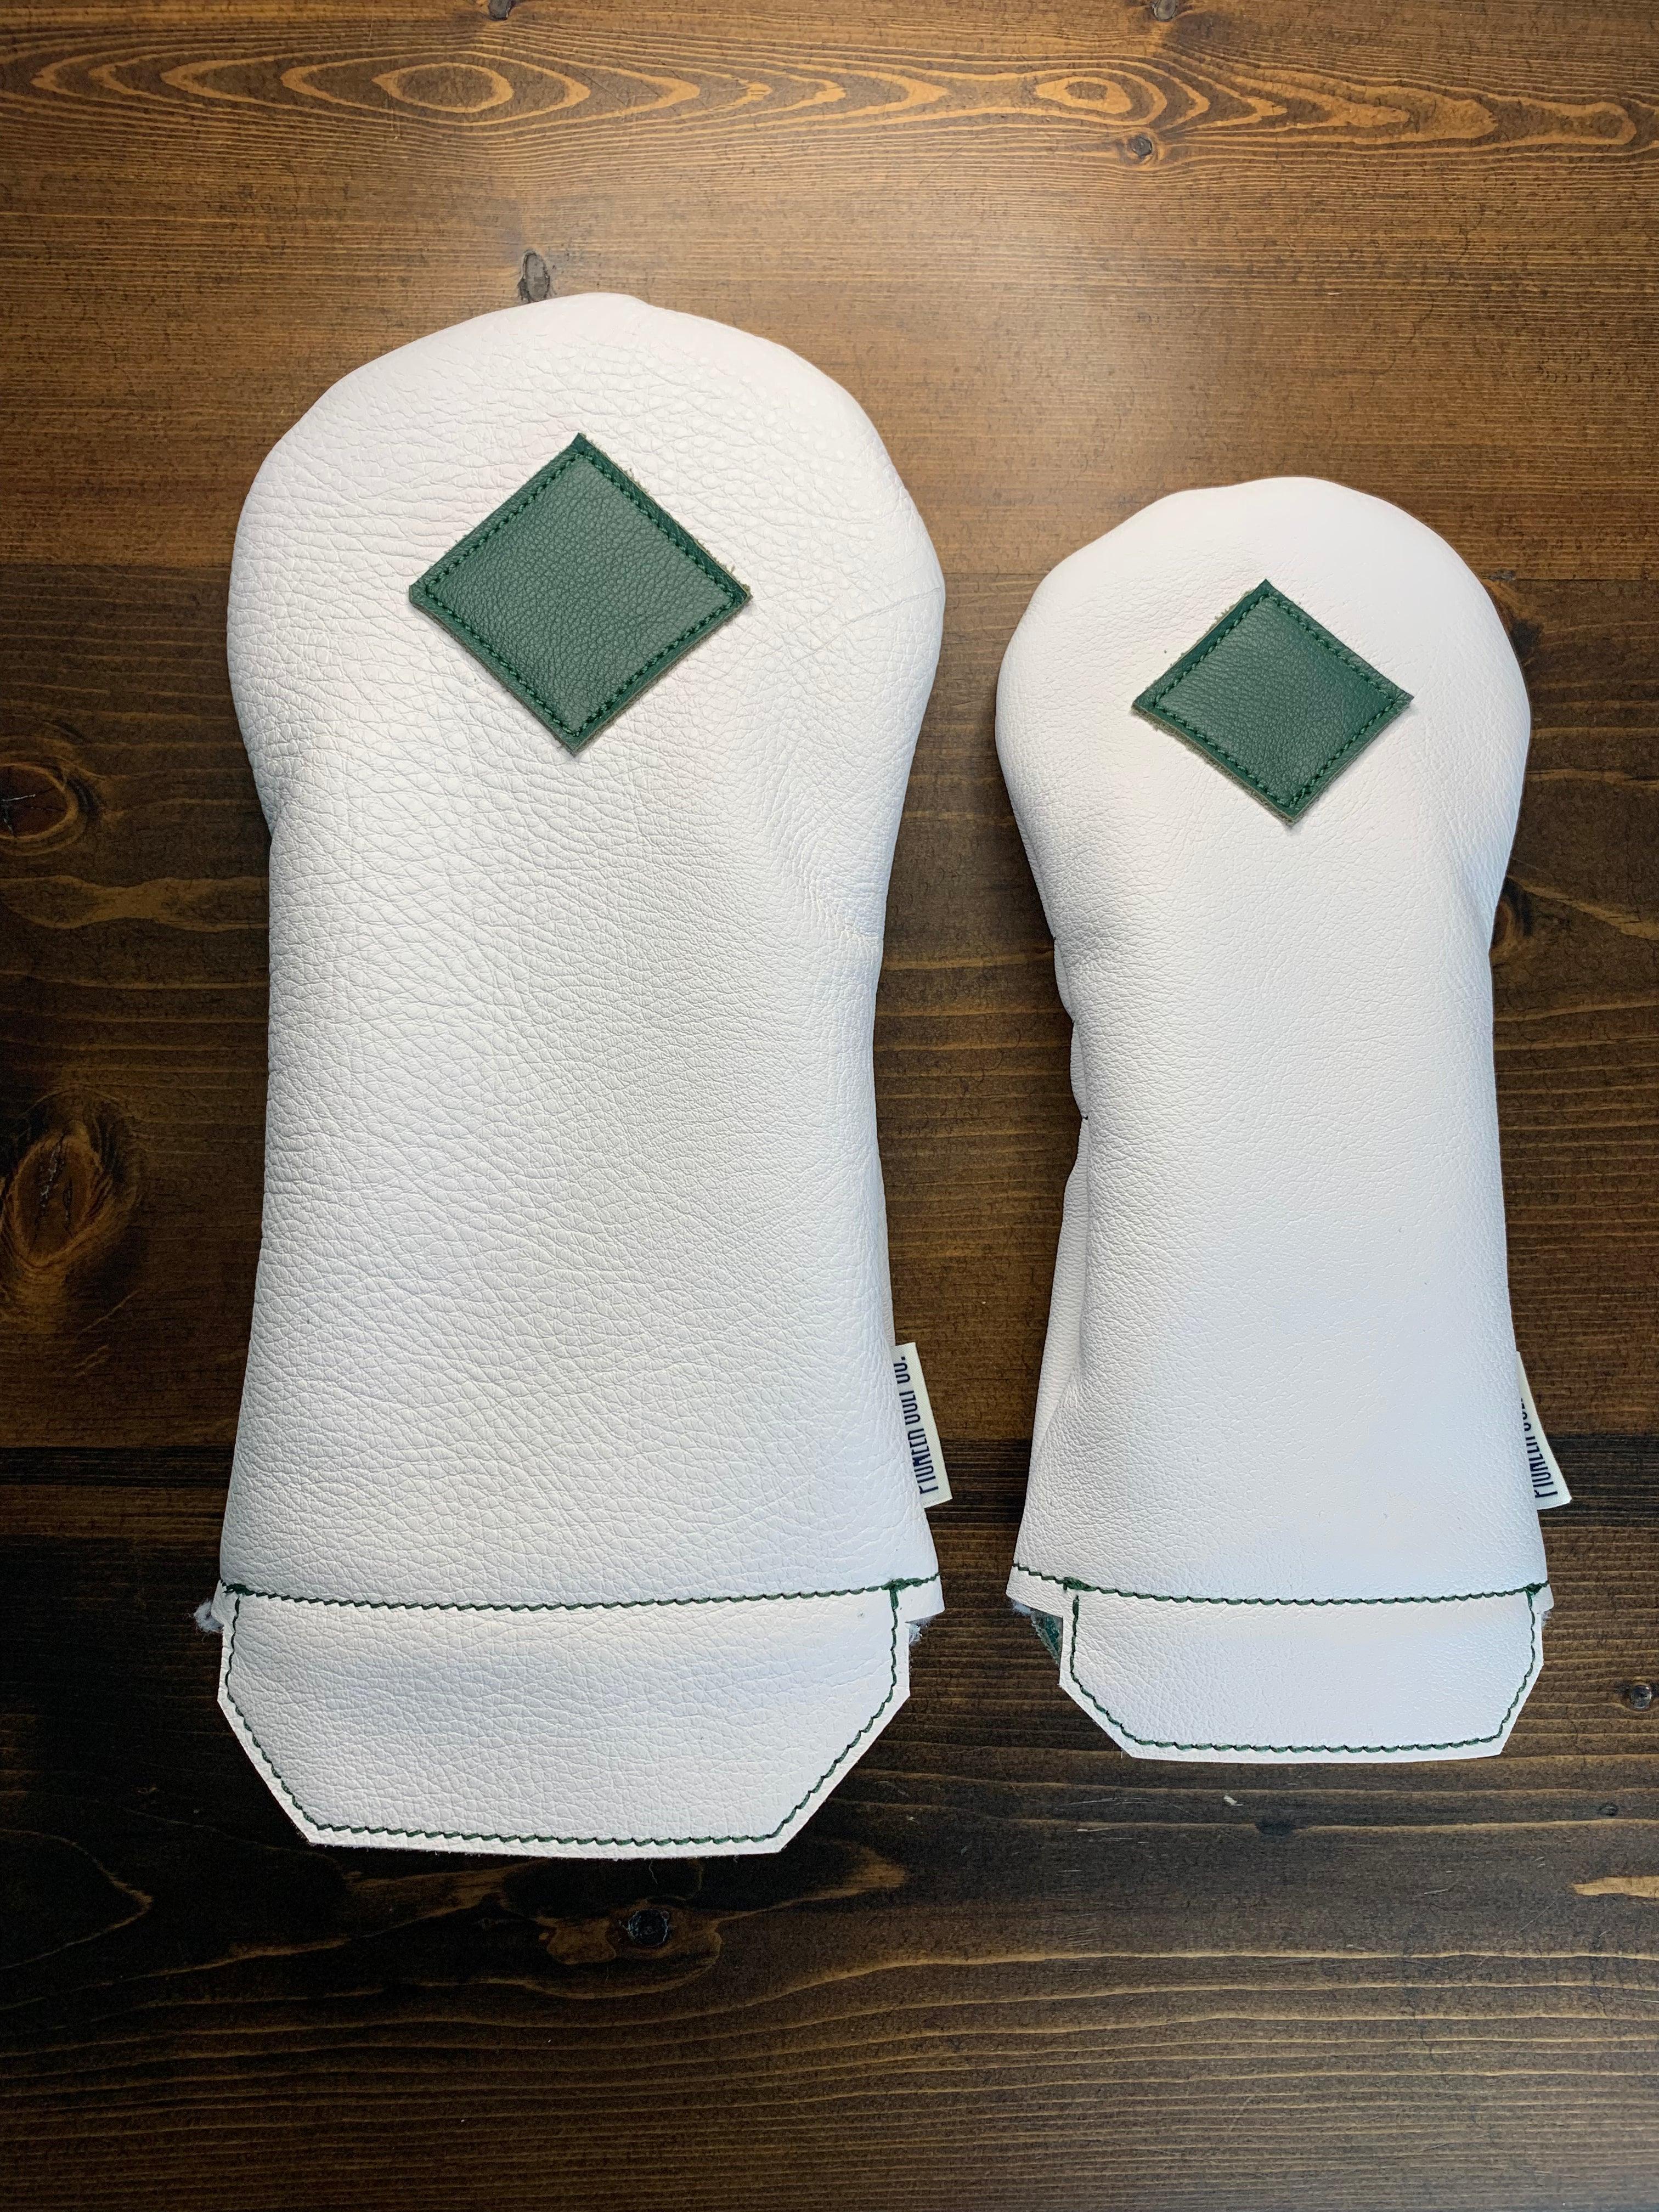  The Looper Pacific Golf Warehouse Pioneer Golf Co. golf, golf accessories, head cover, headcover, headcovers